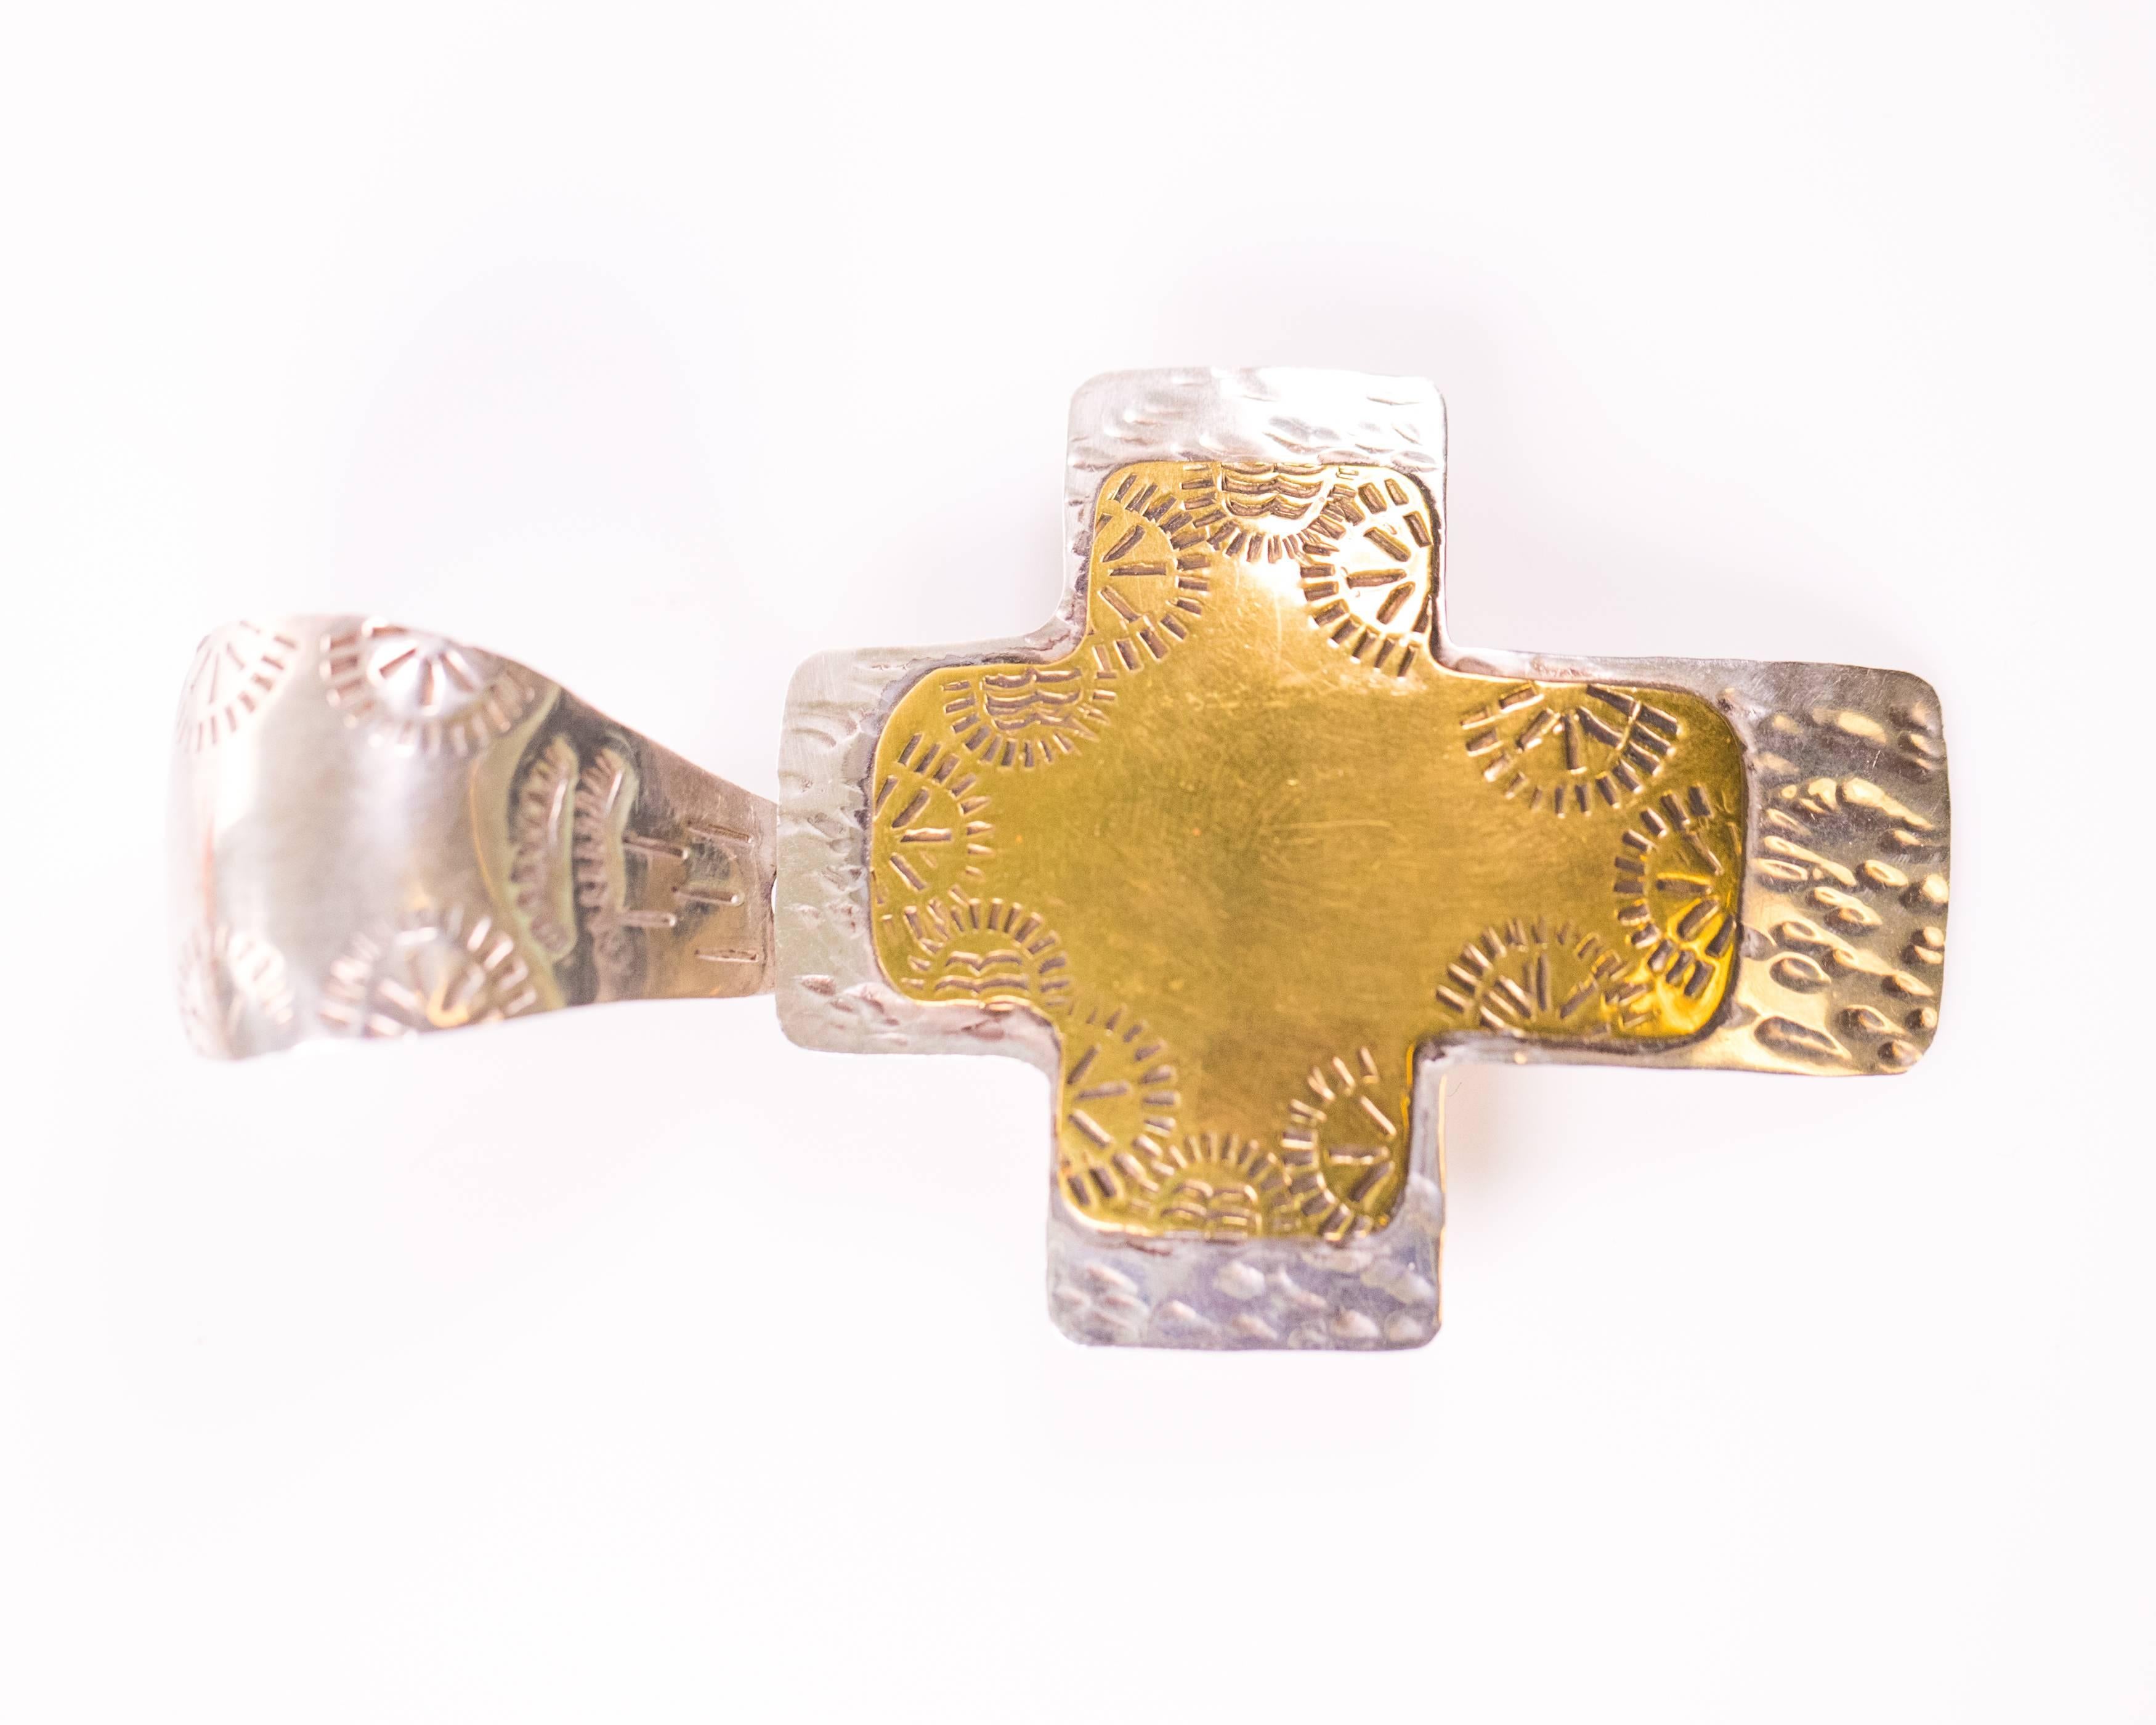 Handmade in Mexico, this gorgeous 1960s Cross Pendant is crafted from .925 Sterling Silver. It measures 3.5 inches high with the bail and 2 inches wide. It features a gold plate cross overlay in the center and native, indigenous-style pattern